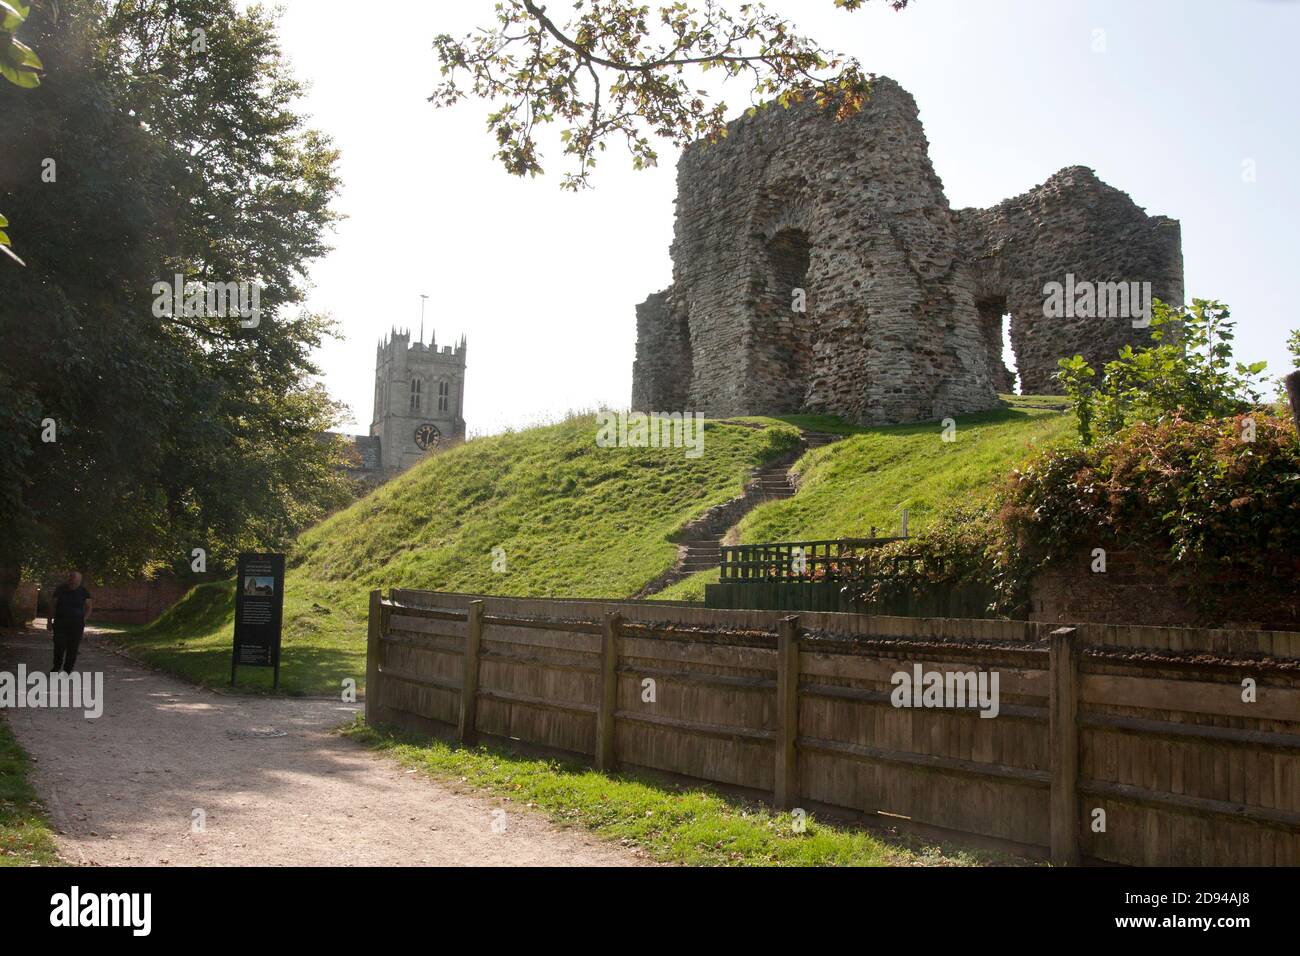 Christchurch Norman castle remains of the great tower stands atop the harbour town of Christchurch, Dorset, England Stock Photo